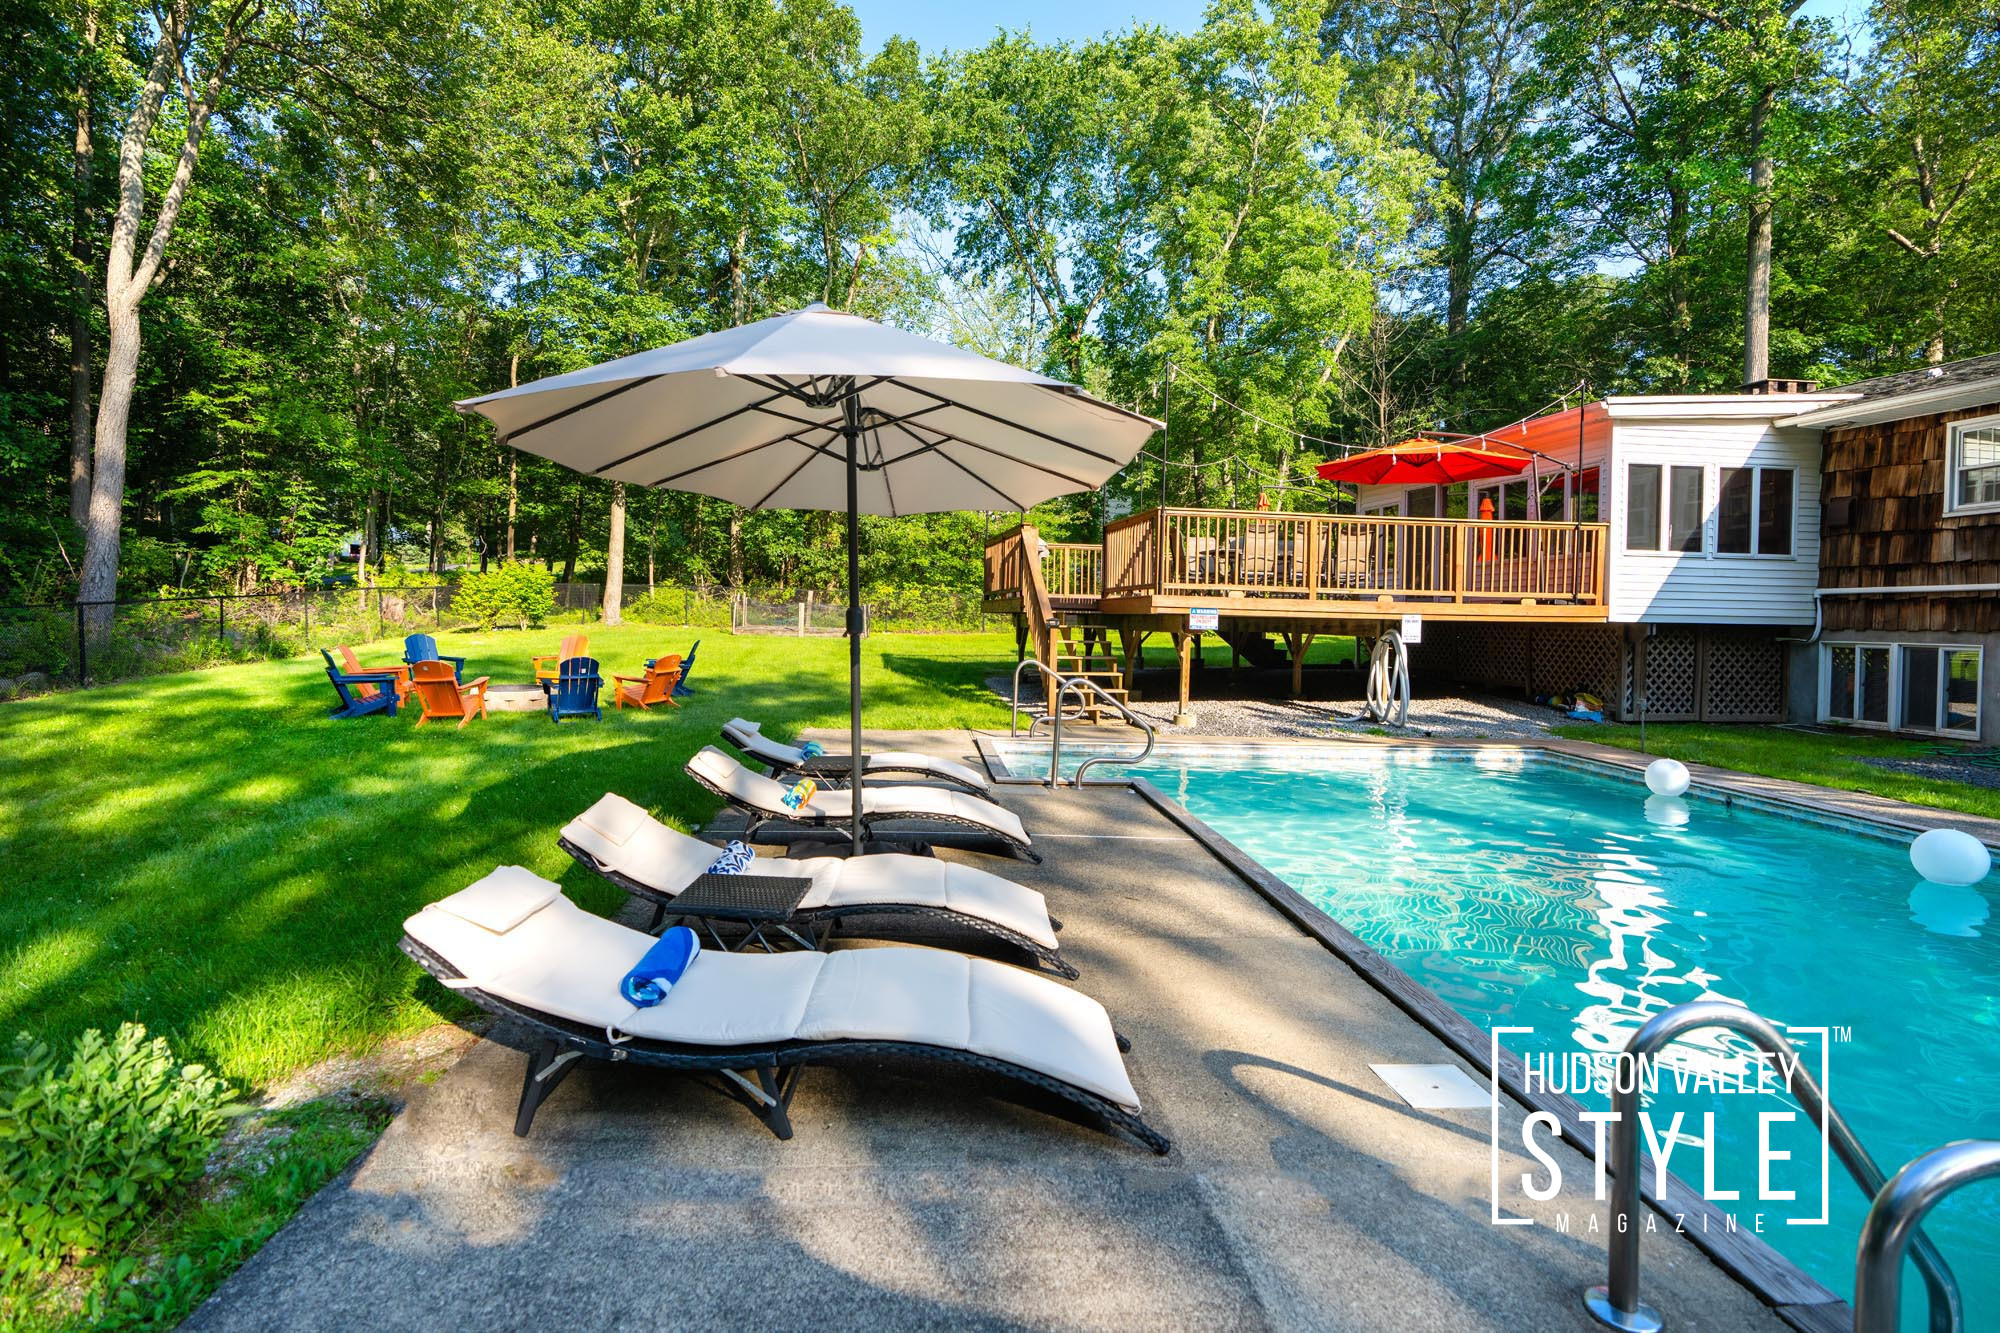 Discover the Best Hudson Valley Airbnb with Pool: A Riveting Photo Tour and Review by Photographer Maxwell Alexander – Presented by Alluvion Media